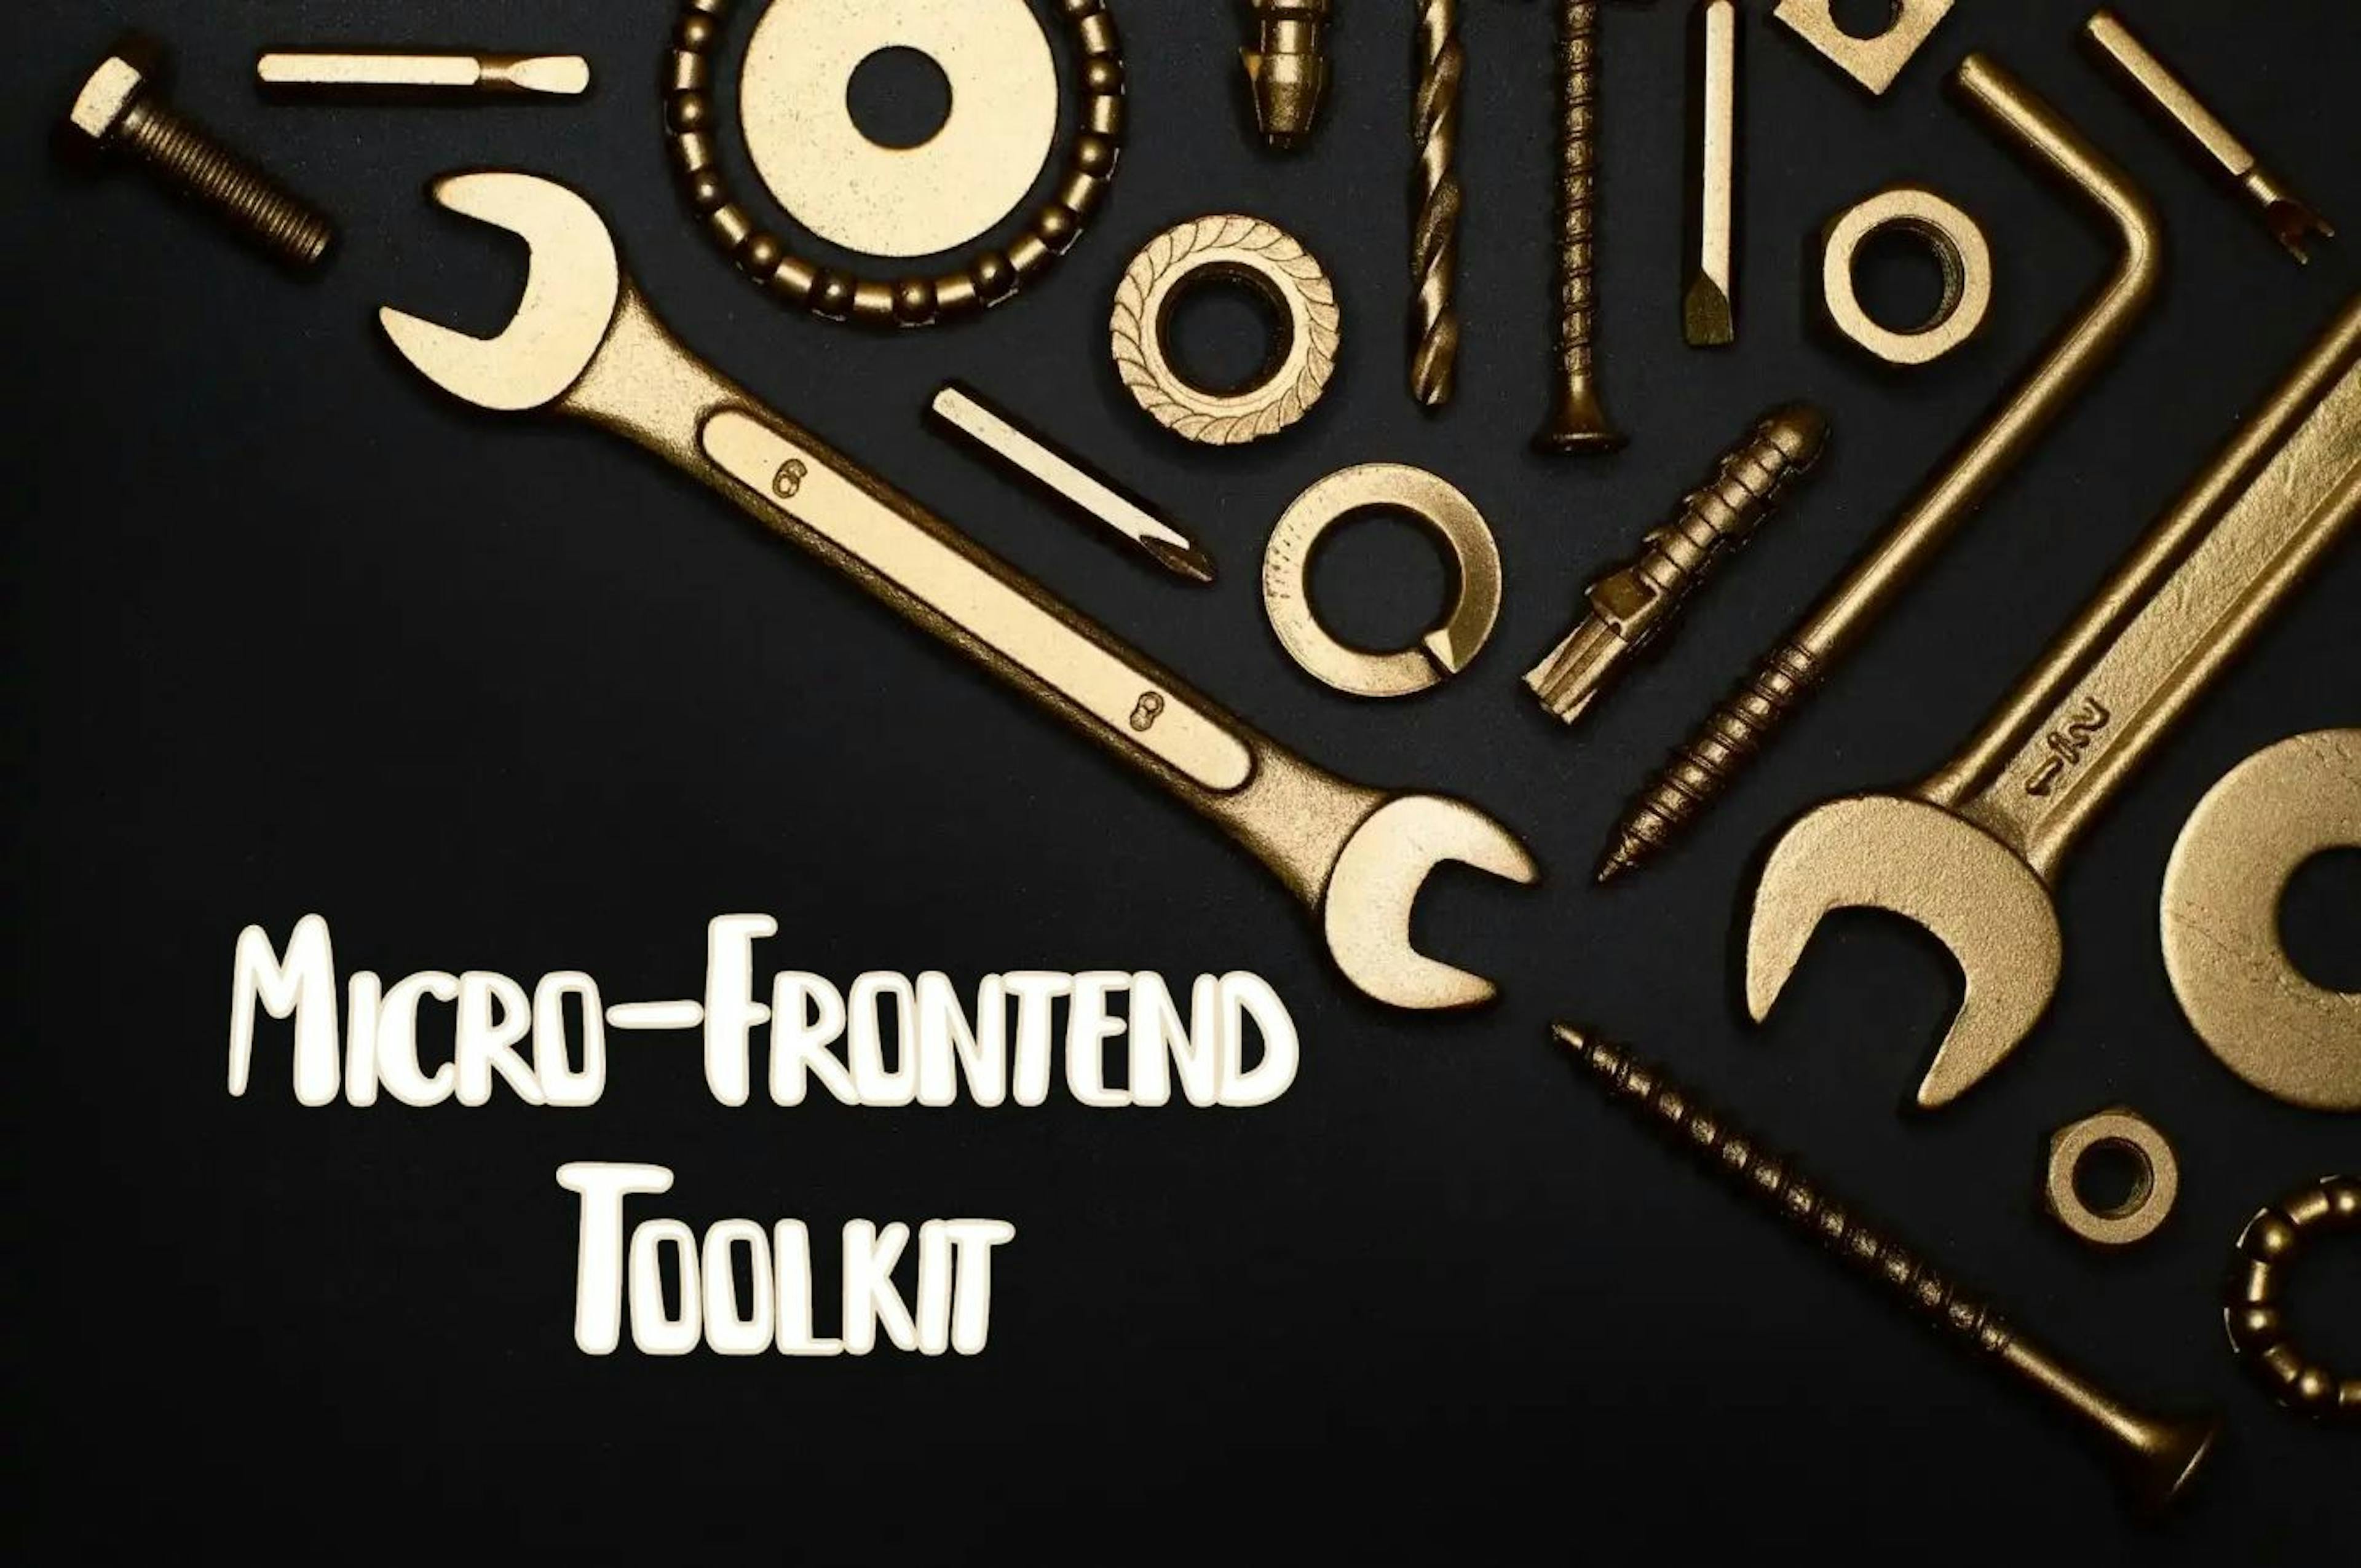 featured image - Micro-frontend Migration Journey — Part 2: The Toolkit